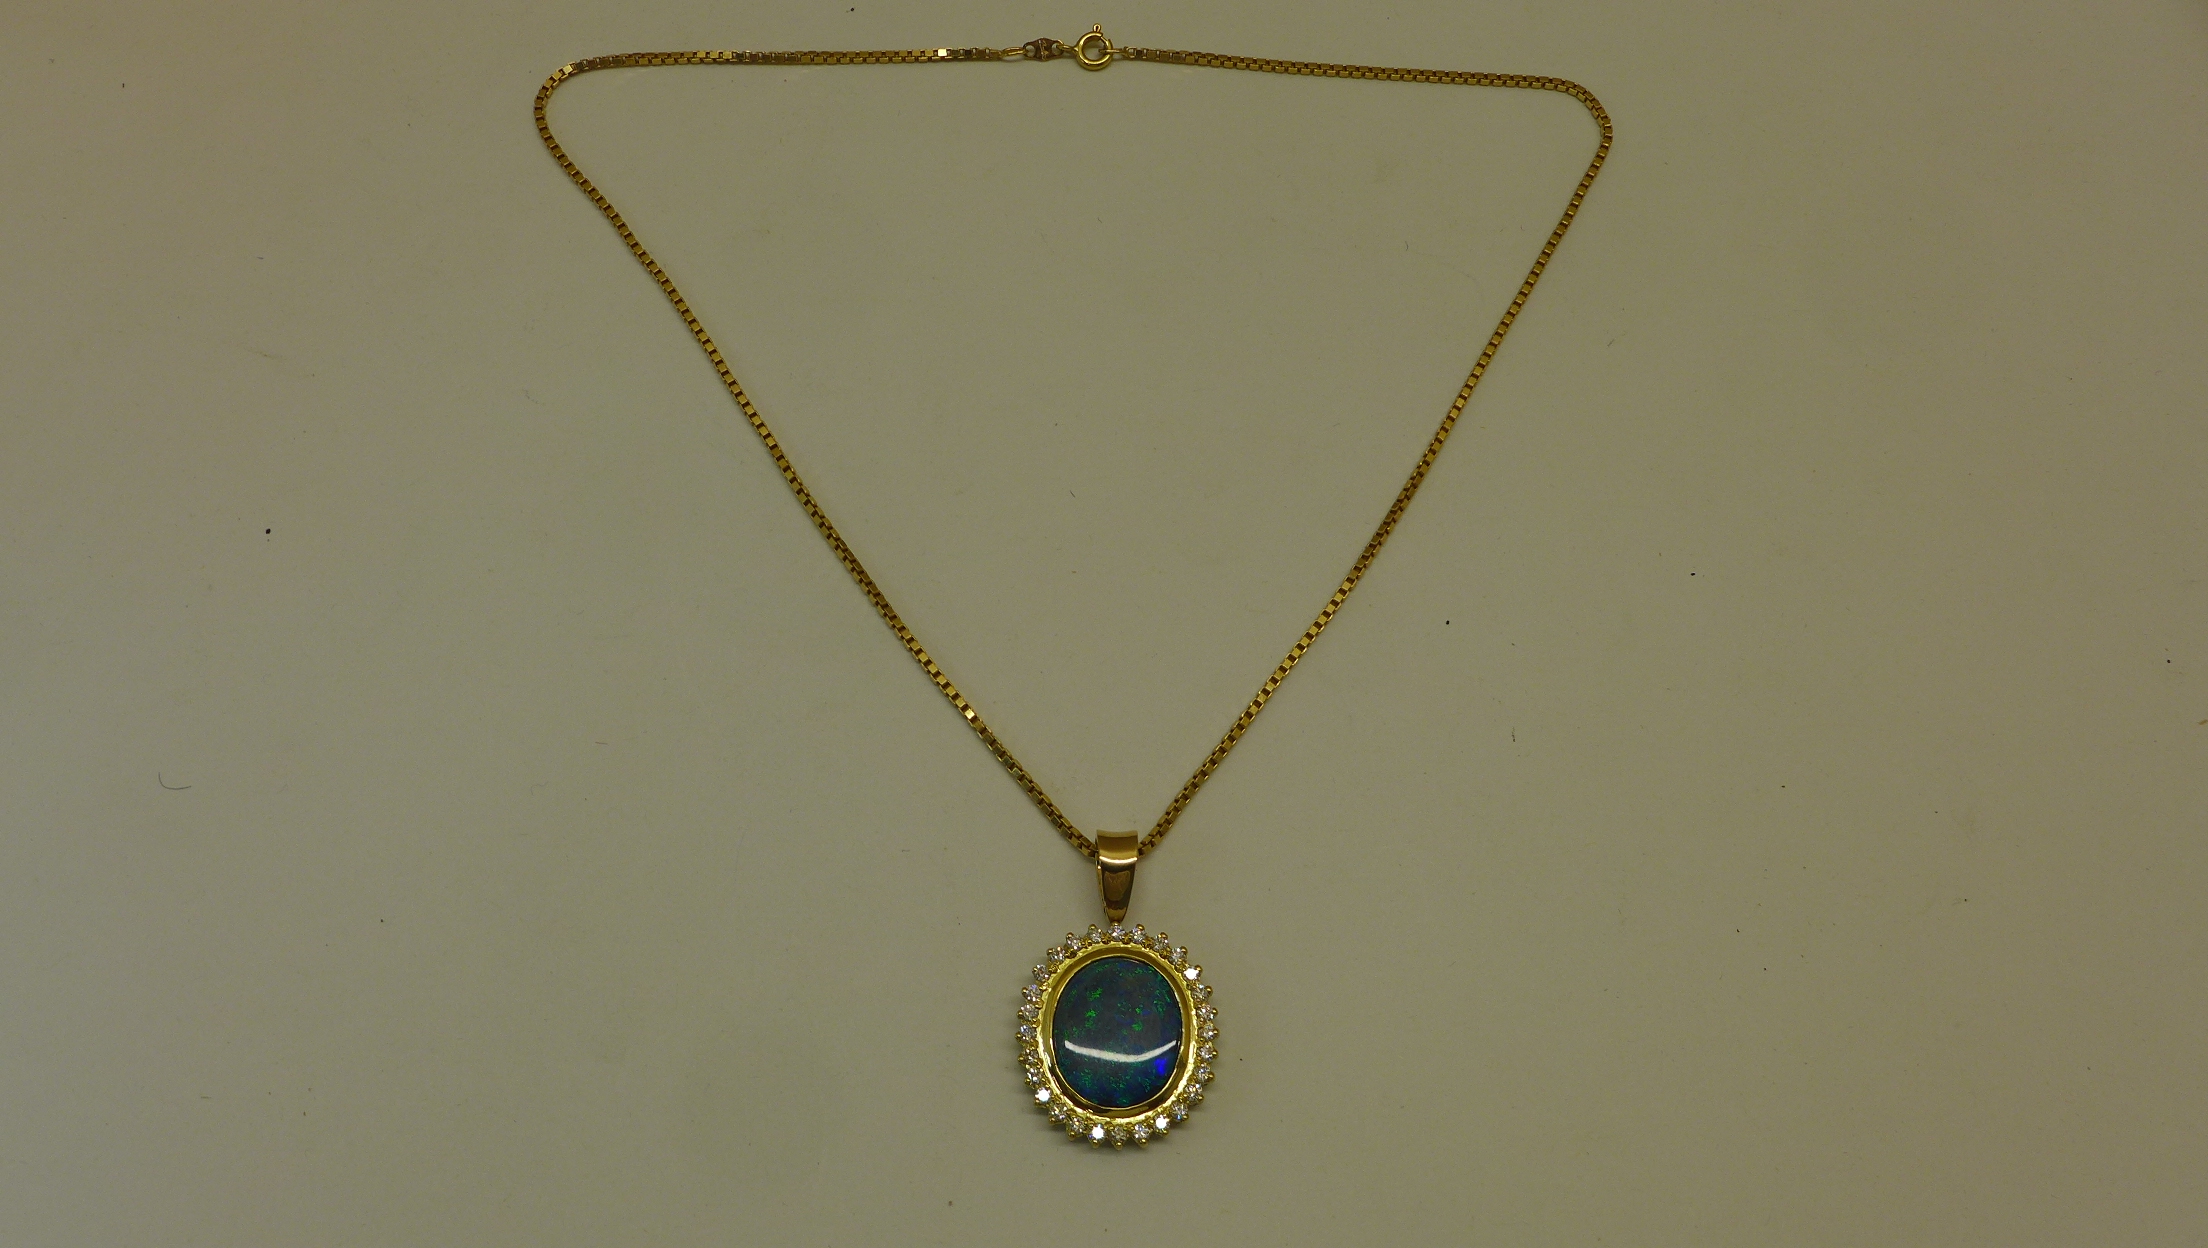 A reversible black opal and diamond pendant set in 18ct yellow gold on an 18ct chain, chain length